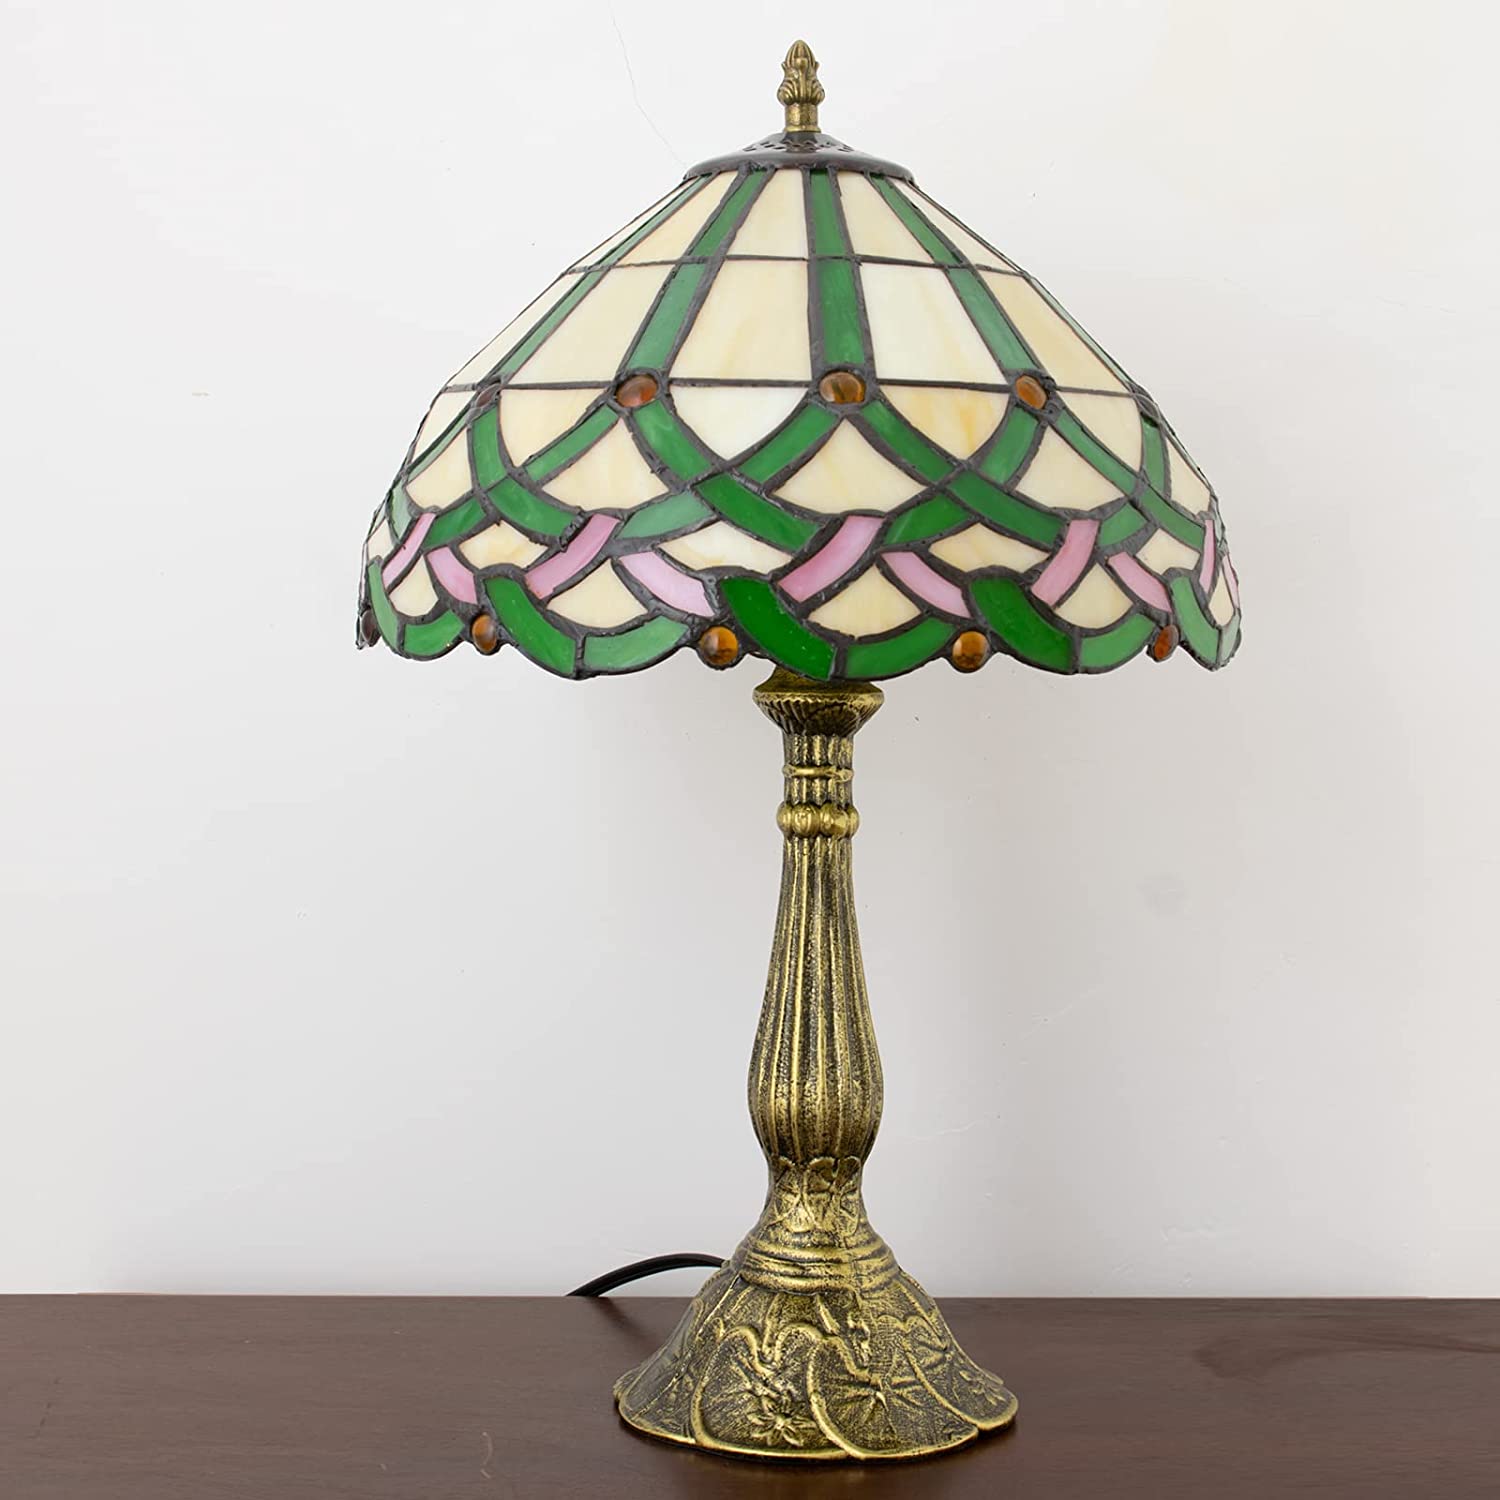 SHADY  Table Lamp Stained Glass Bedside Lamp Green Floral Desk Reading Light 18&#34; Tall Vintage Antique Style Banker Lamp Room Bedroom Living Study Coffee Bar Office LED Bulb Inc